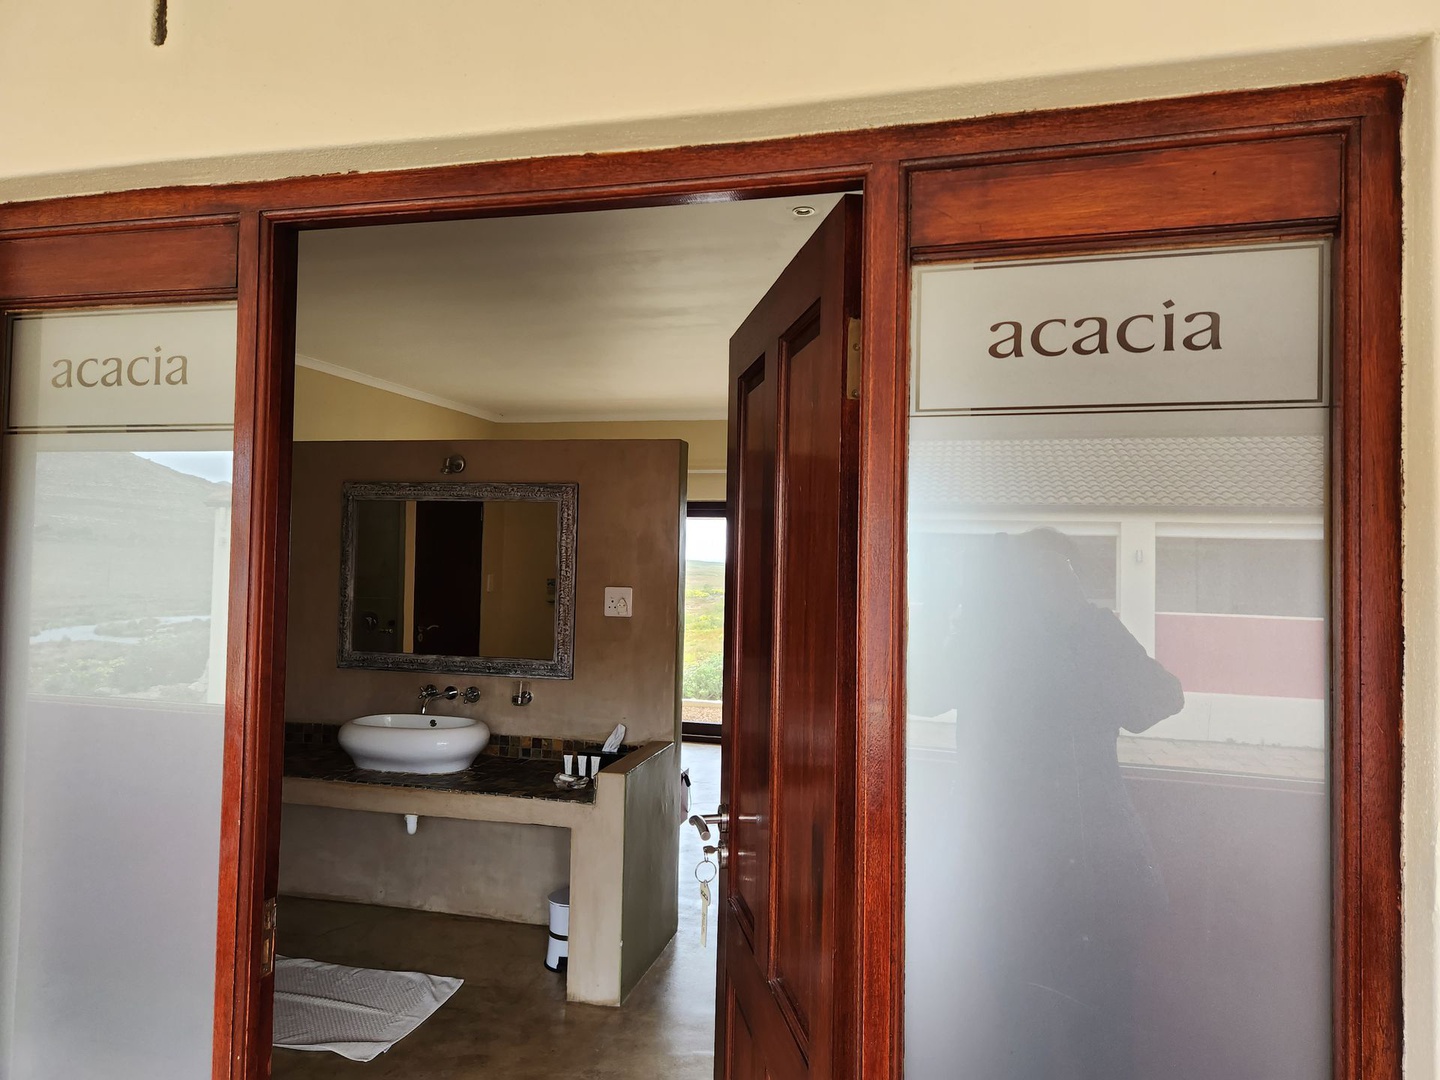 House in Pringle Bay Rural - Each of the 8 bedrooms has a local fynbos name - Acacia is one of the 4 Queensized rooms